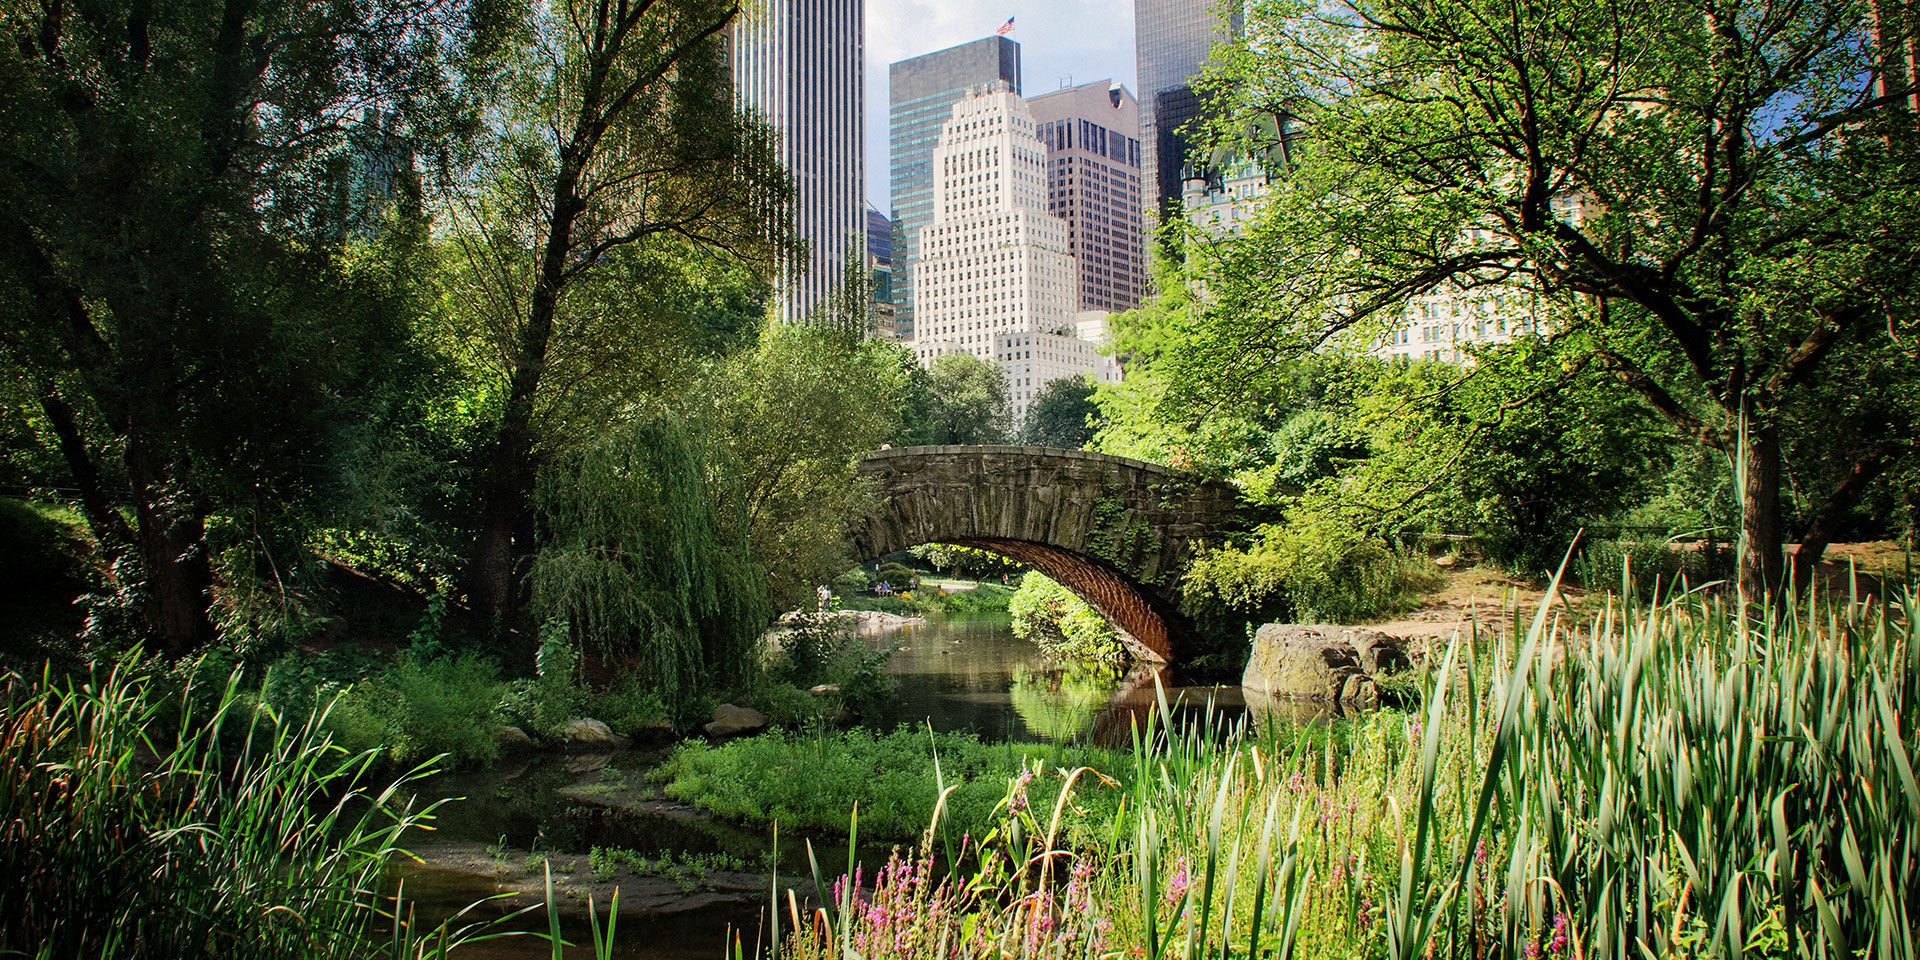 Central Park In New York: What To Do, Where To Eat CNN | vlr.eng.br